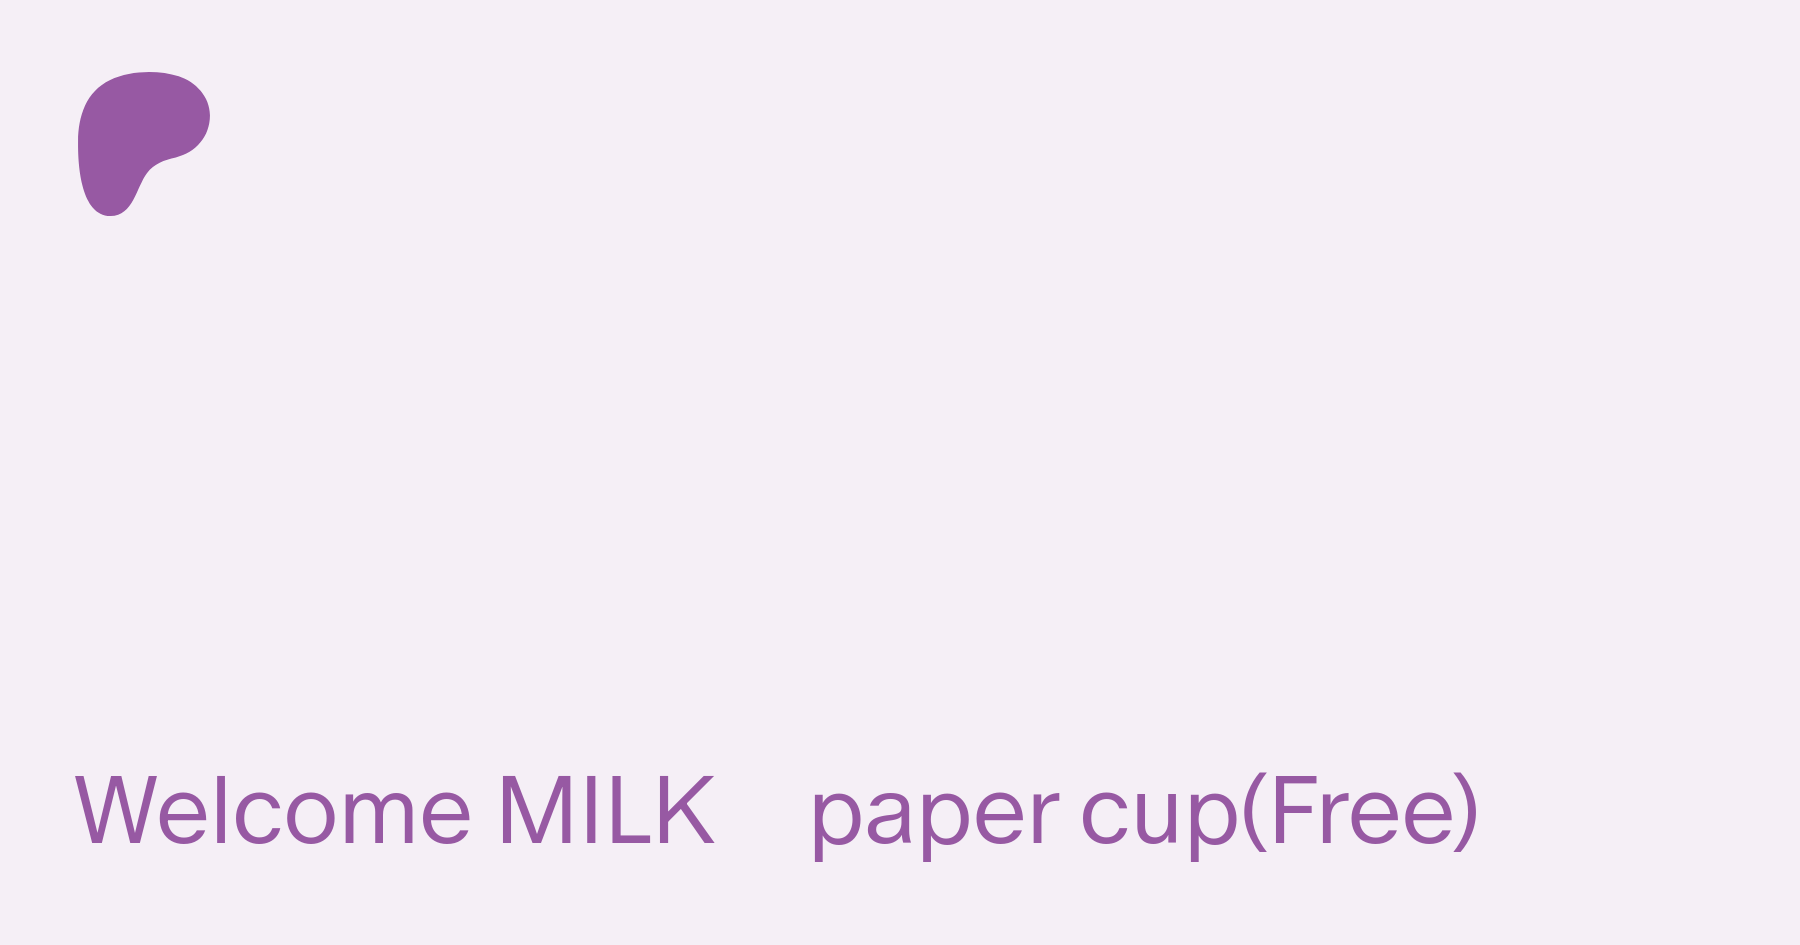 Welcome MILK paper cup(Free) | Patreon